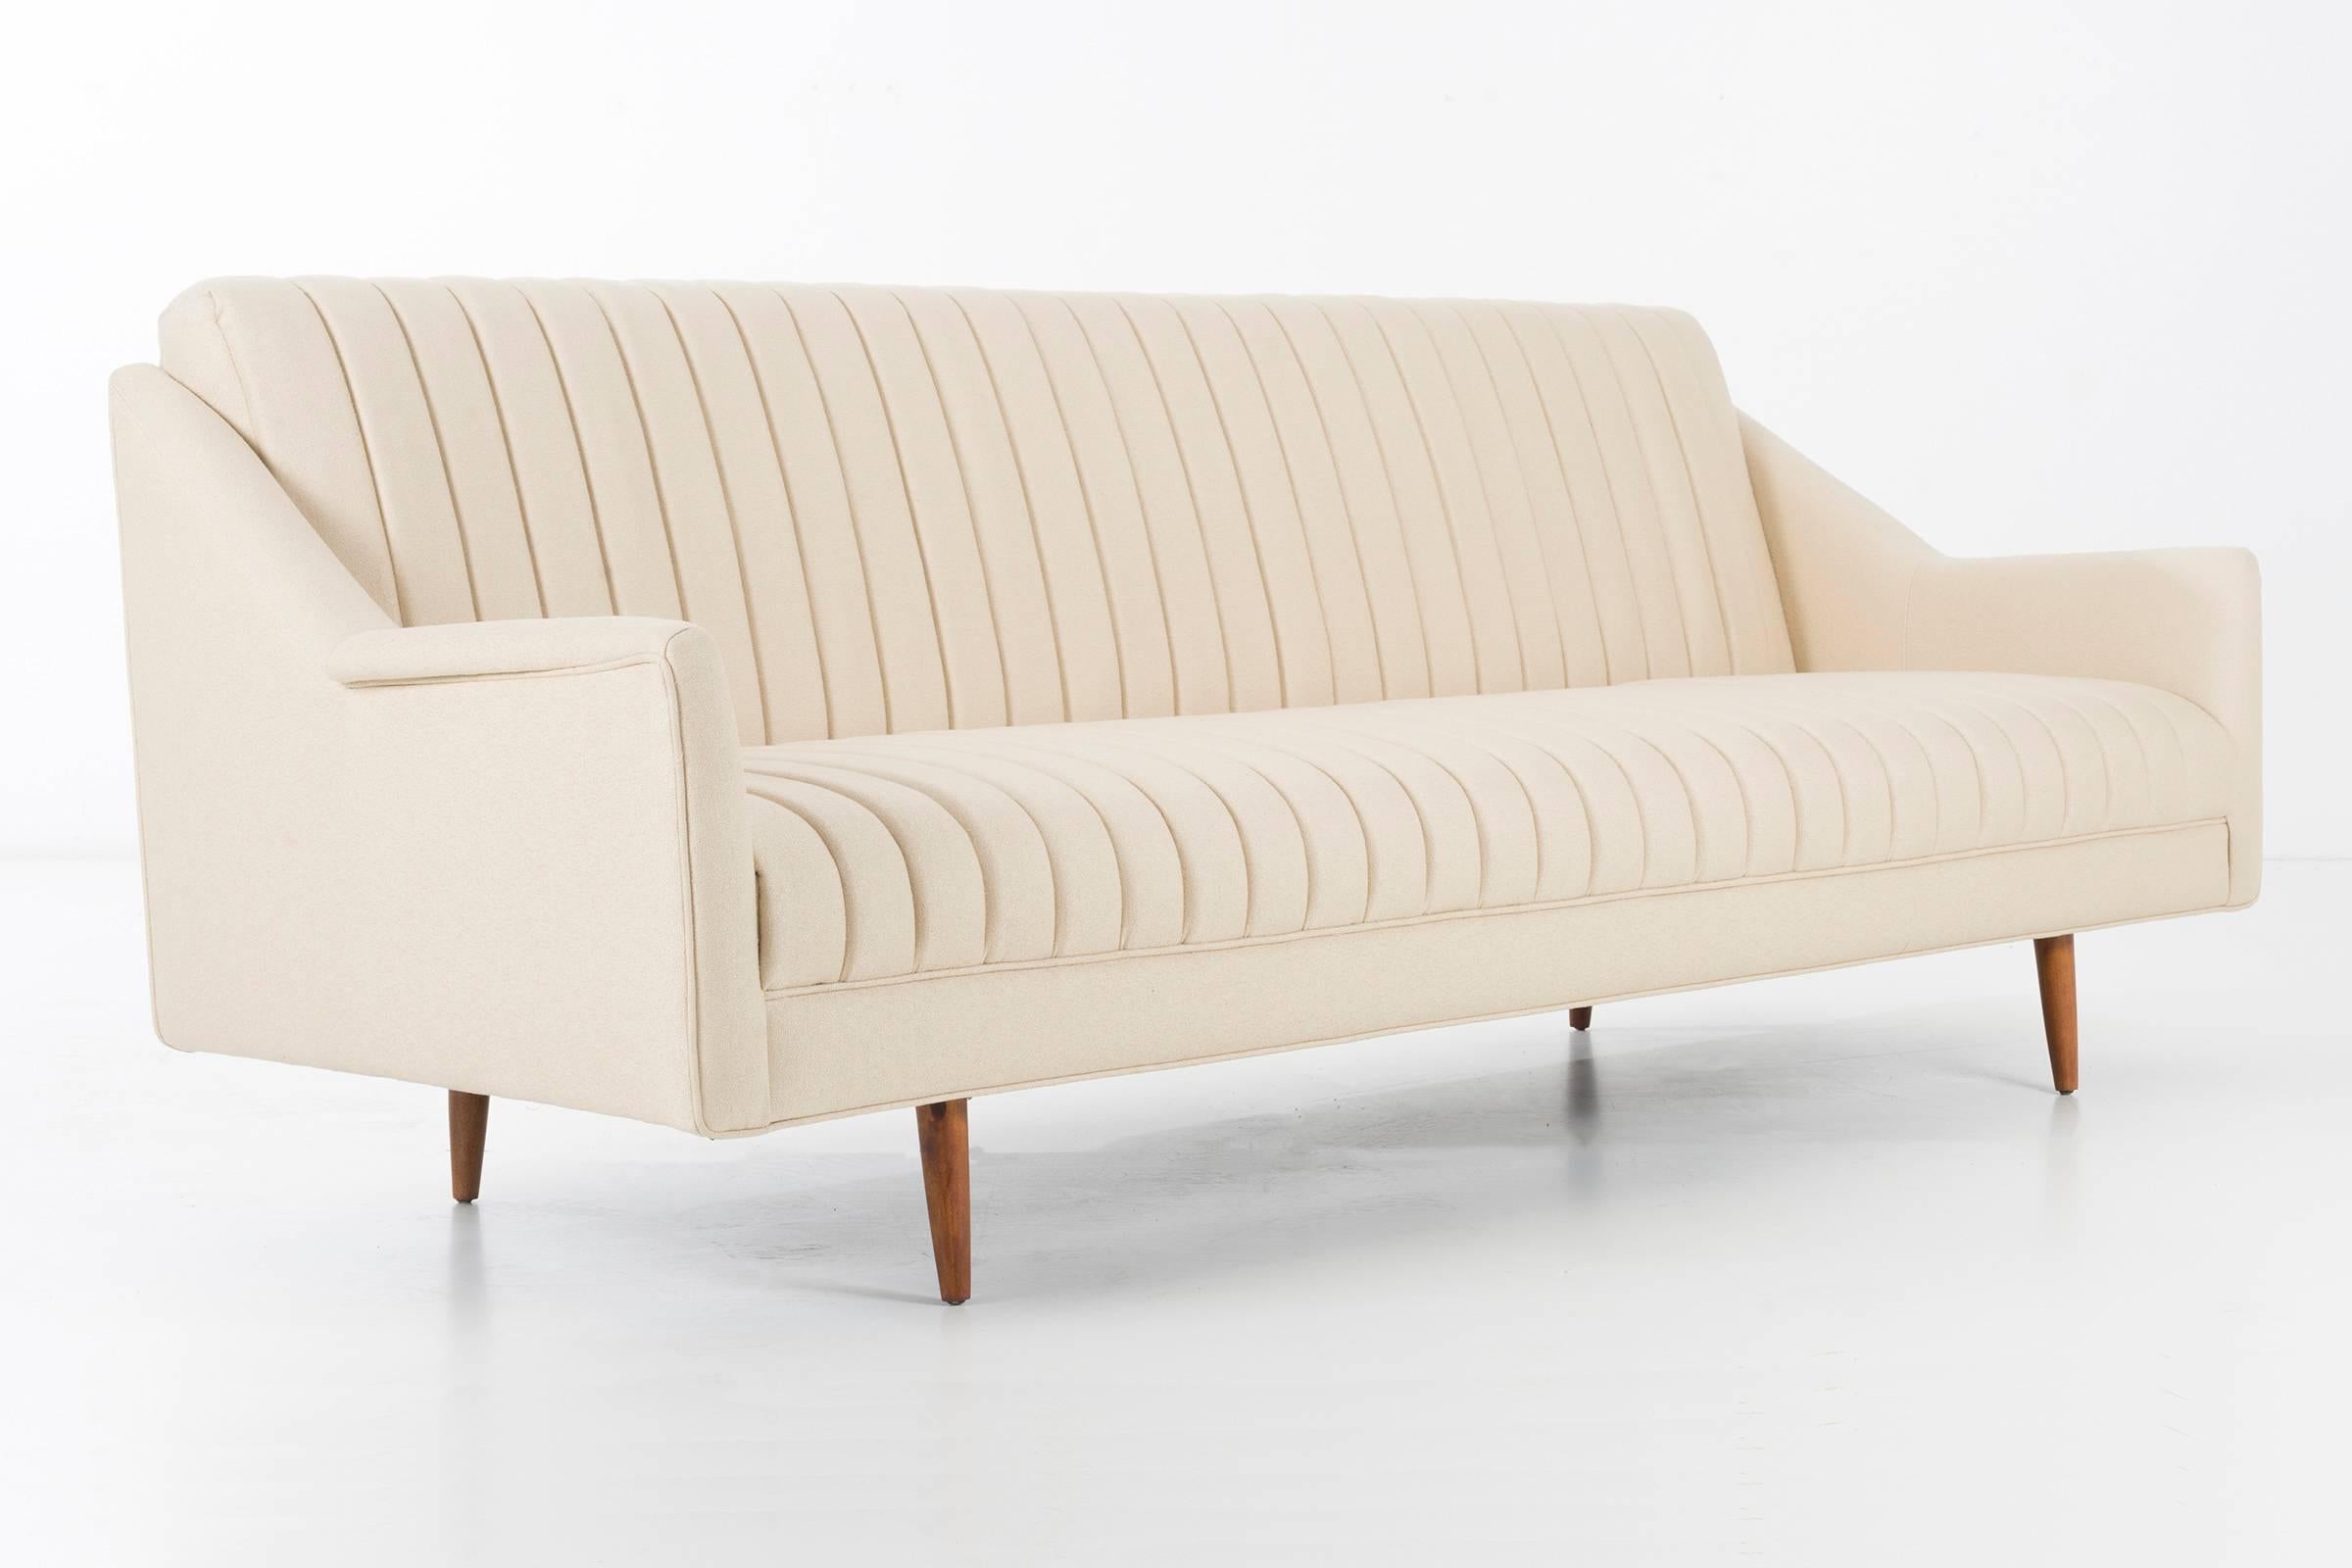 Milo Baughman channel back sofa, circa 1954.
reupholstered with Great Plains wool/poly blend 
Solid turned wood legs.
Shown Coffee Table Sam Maloof sold separately 